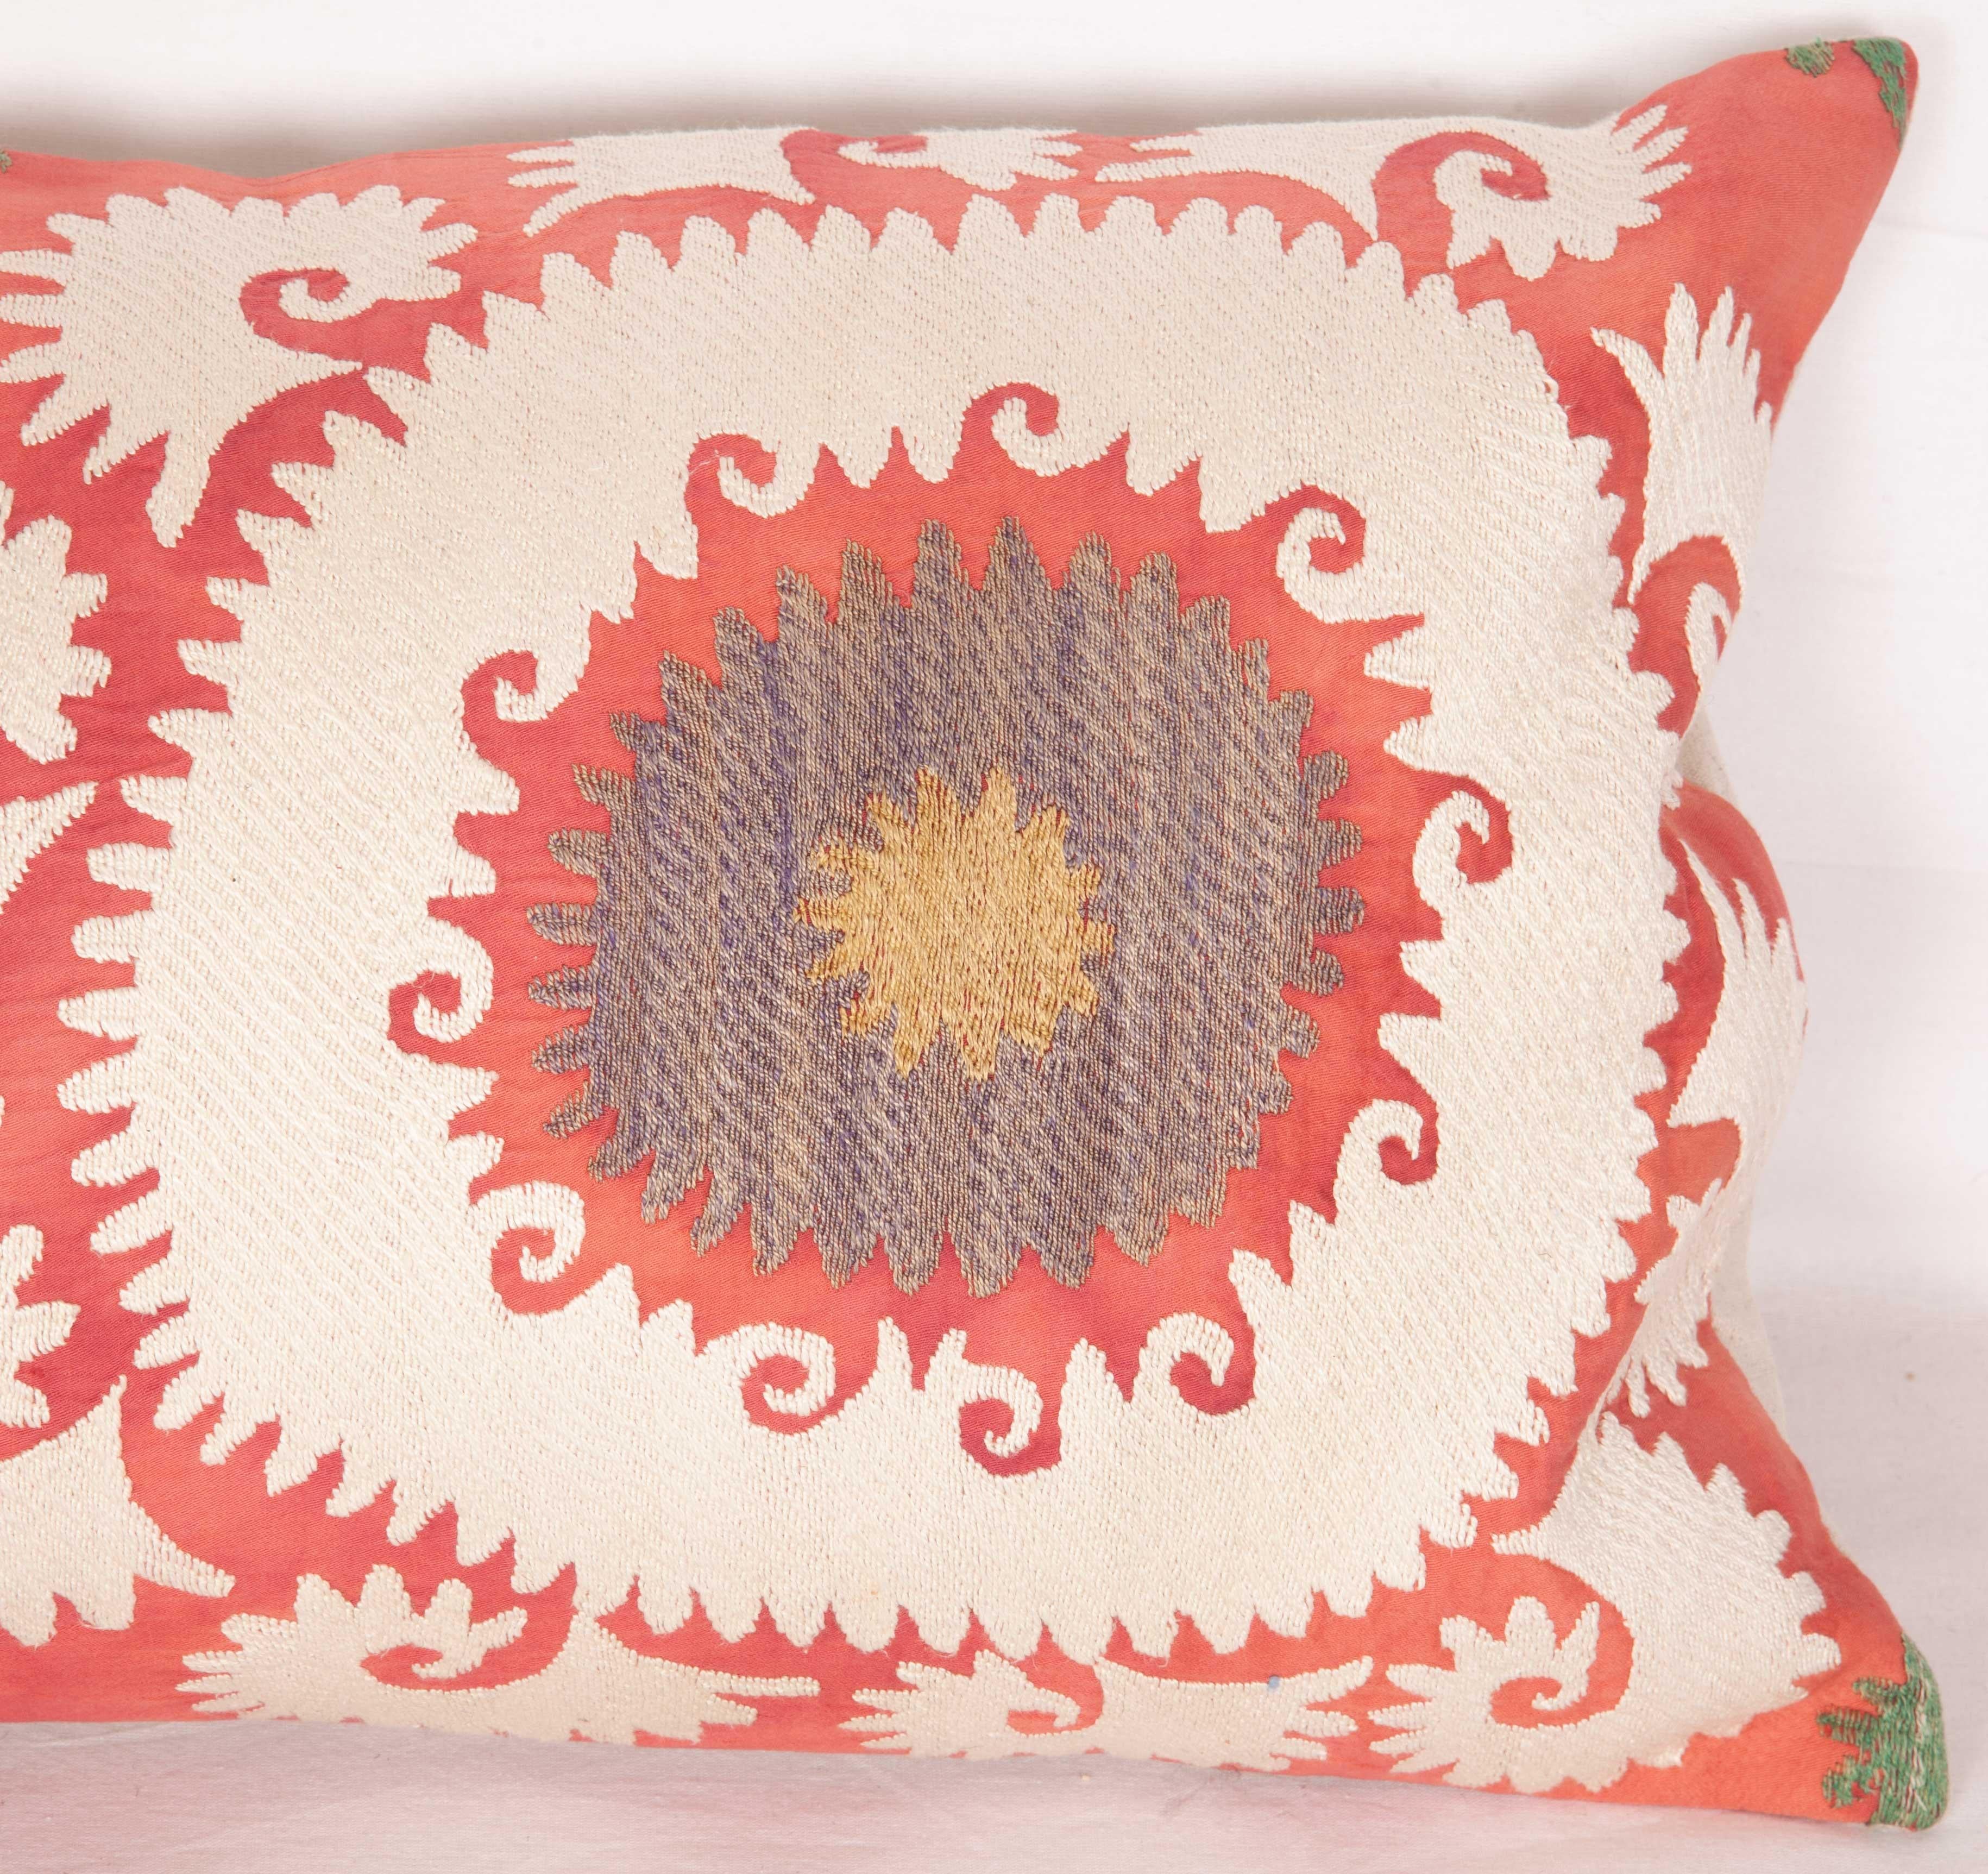 Embroidered Lumbar Pillow Case Fashioned from a Mid-20th Century Uzbek suzani